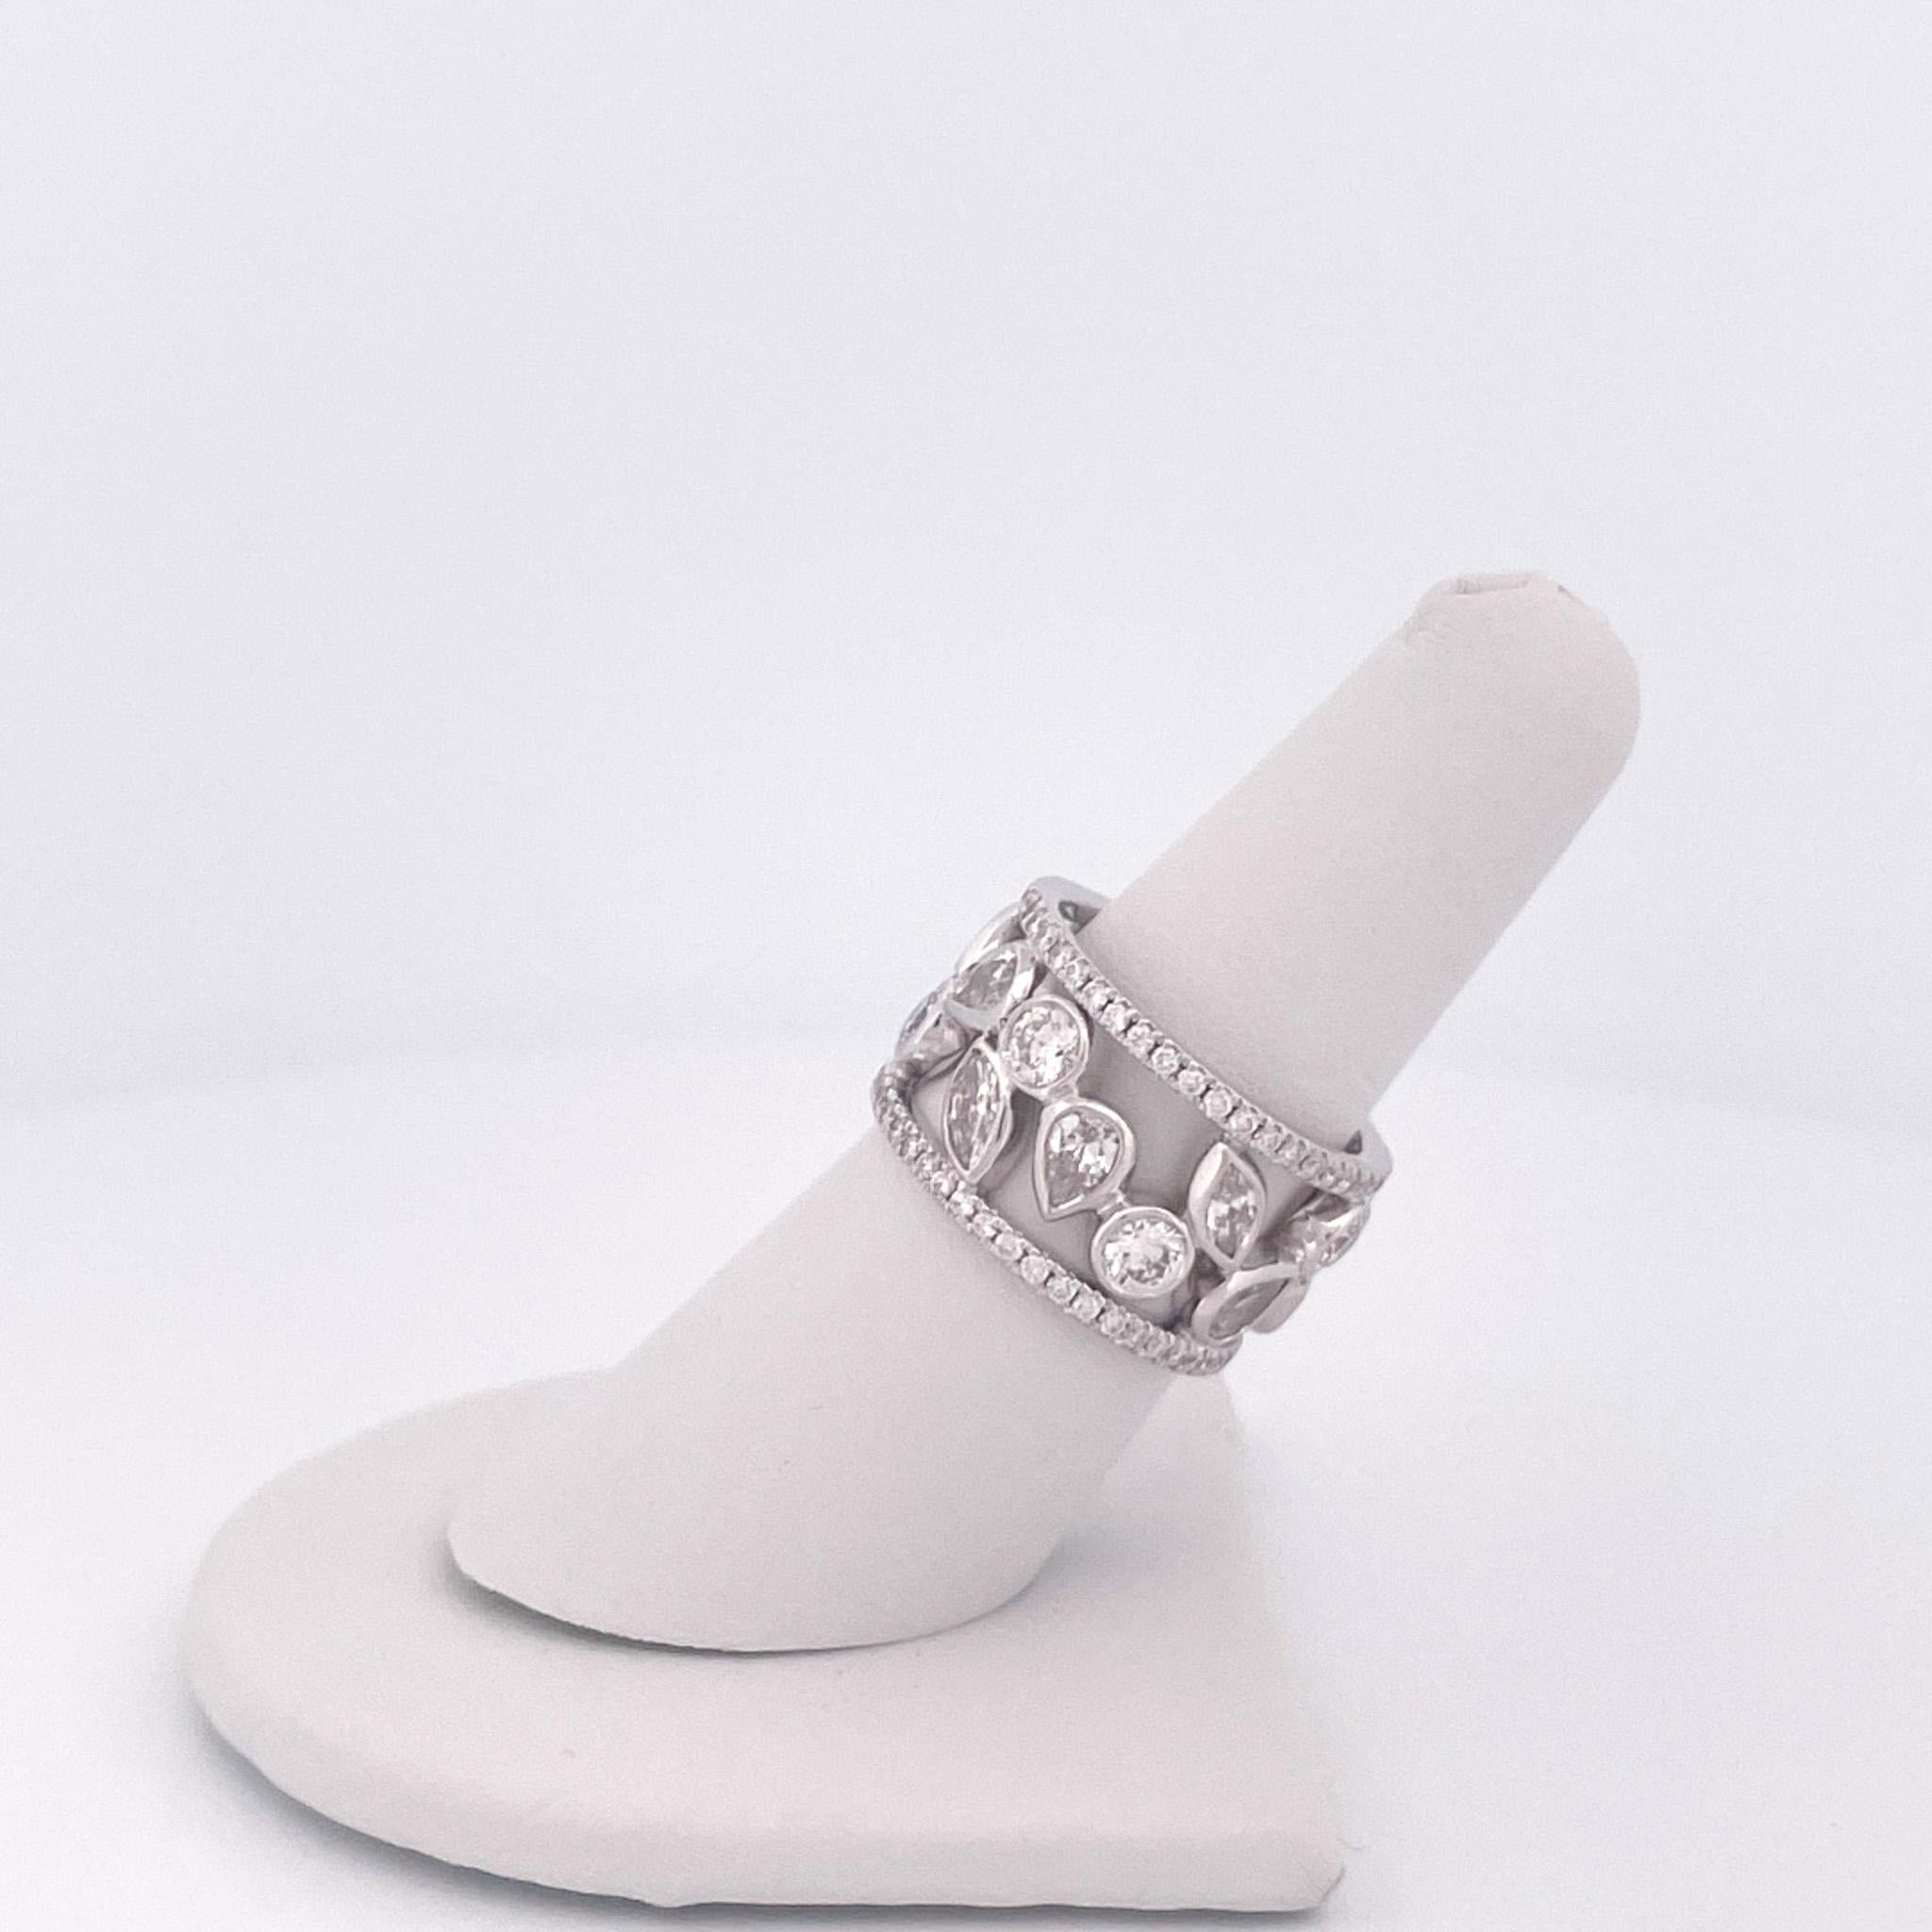 From designer Roberto Coin’s Cento Dolce Collection, 18 karat white gold diamond wide band. This band is crafted with an assortment of round brilliant cut, marquise shape, pear shape, and round cut diamonds with a total combined weight of 4.22